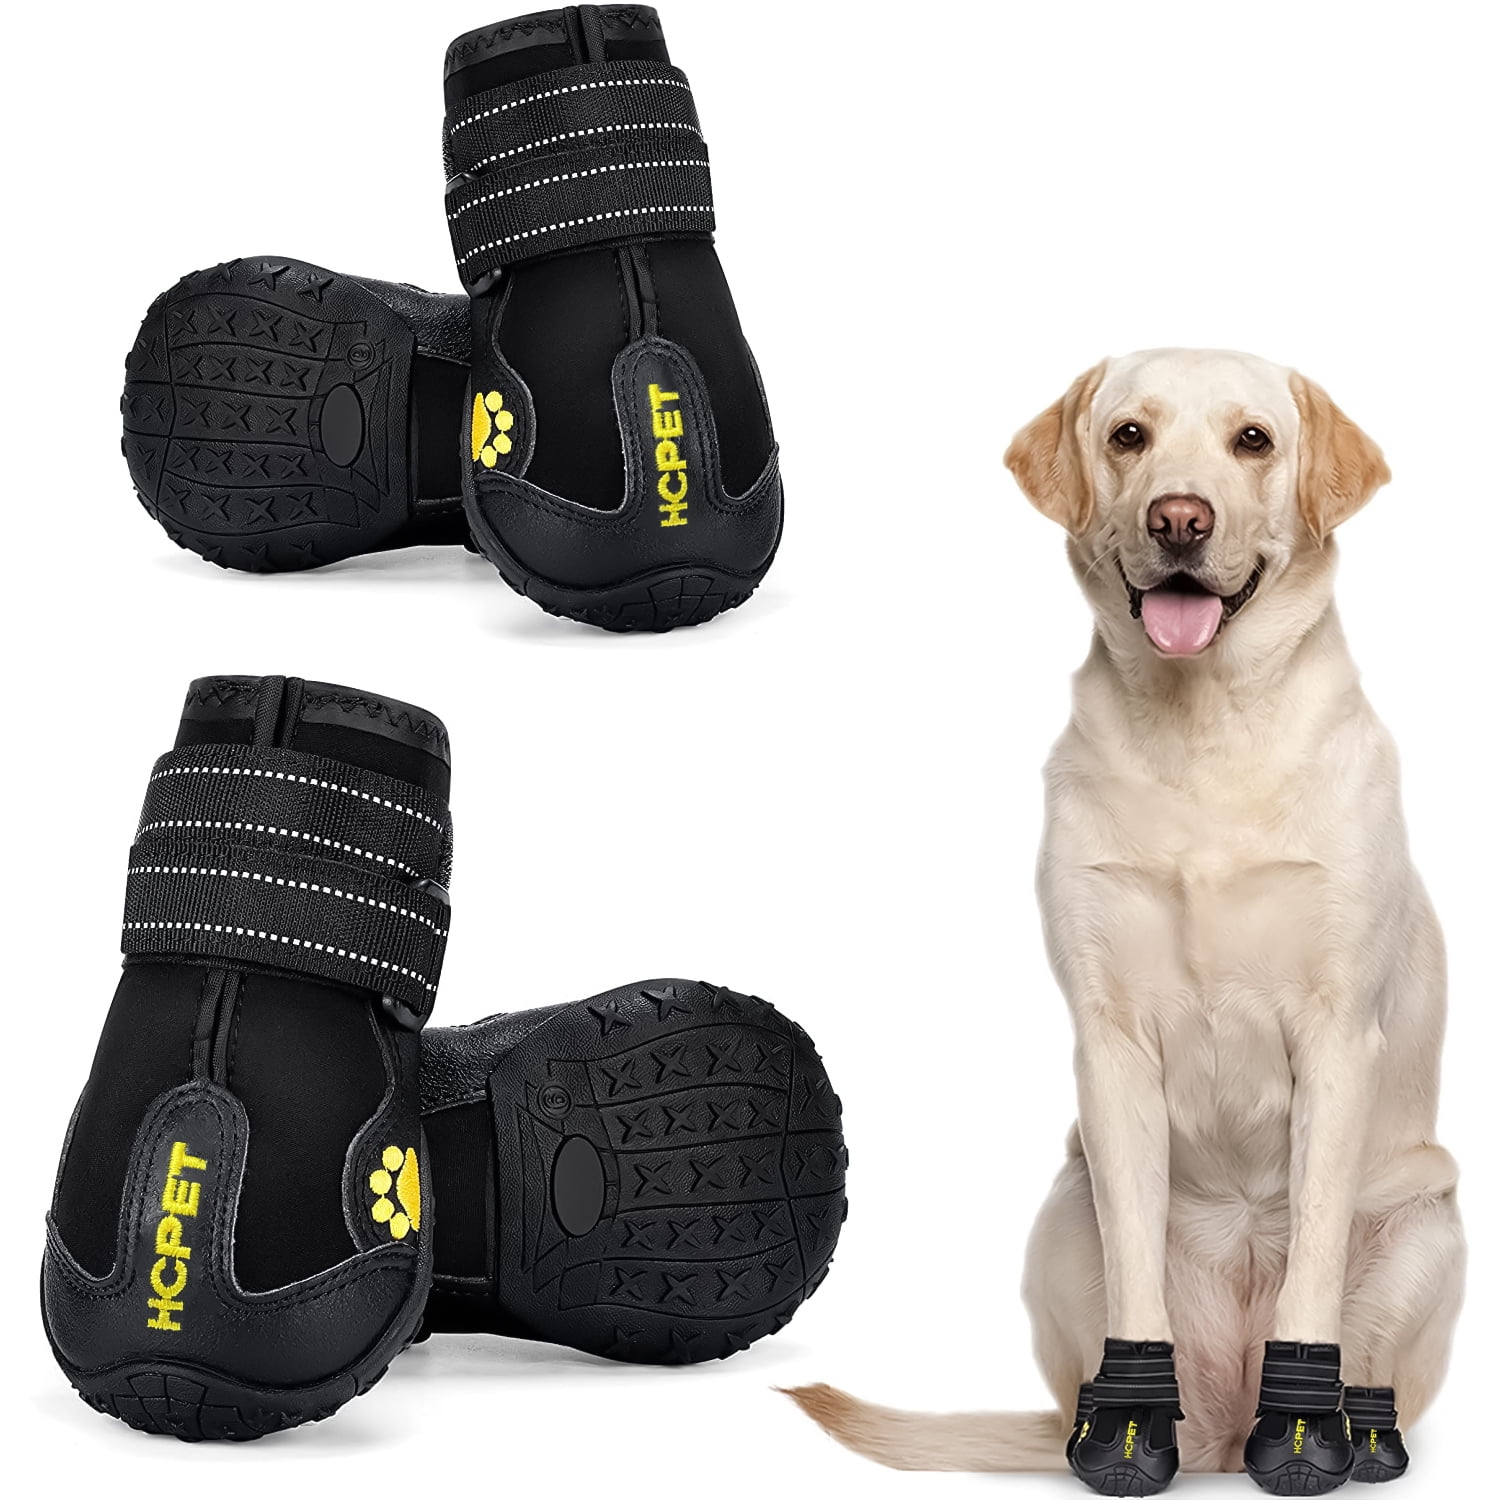 Hcpet Dog Boots Waterproof Dog Shoes for Small Medium Large Dogs Anti-Slip Puppy Booties Paw Protector with Reflective Straps 4Pcs 